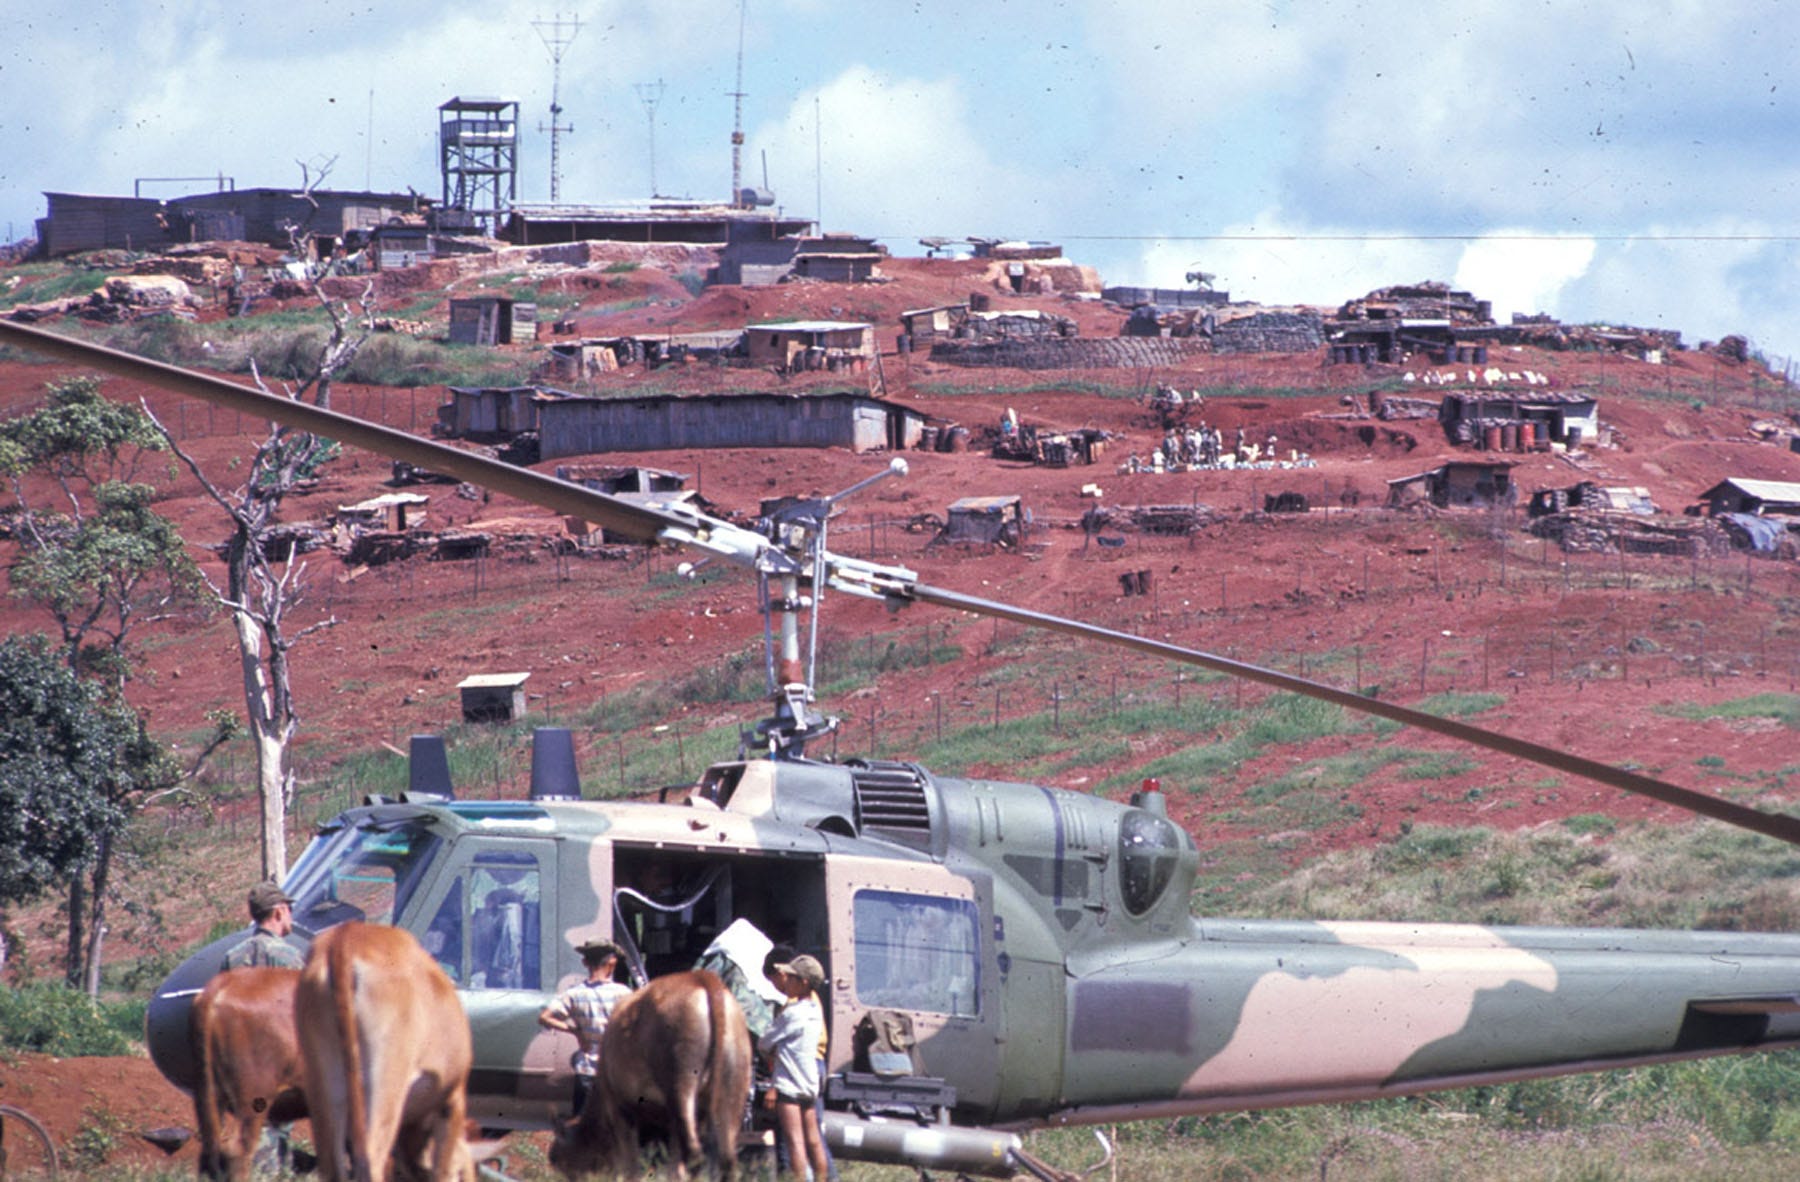 Air Force Bell UH-1P helicopter in Laos